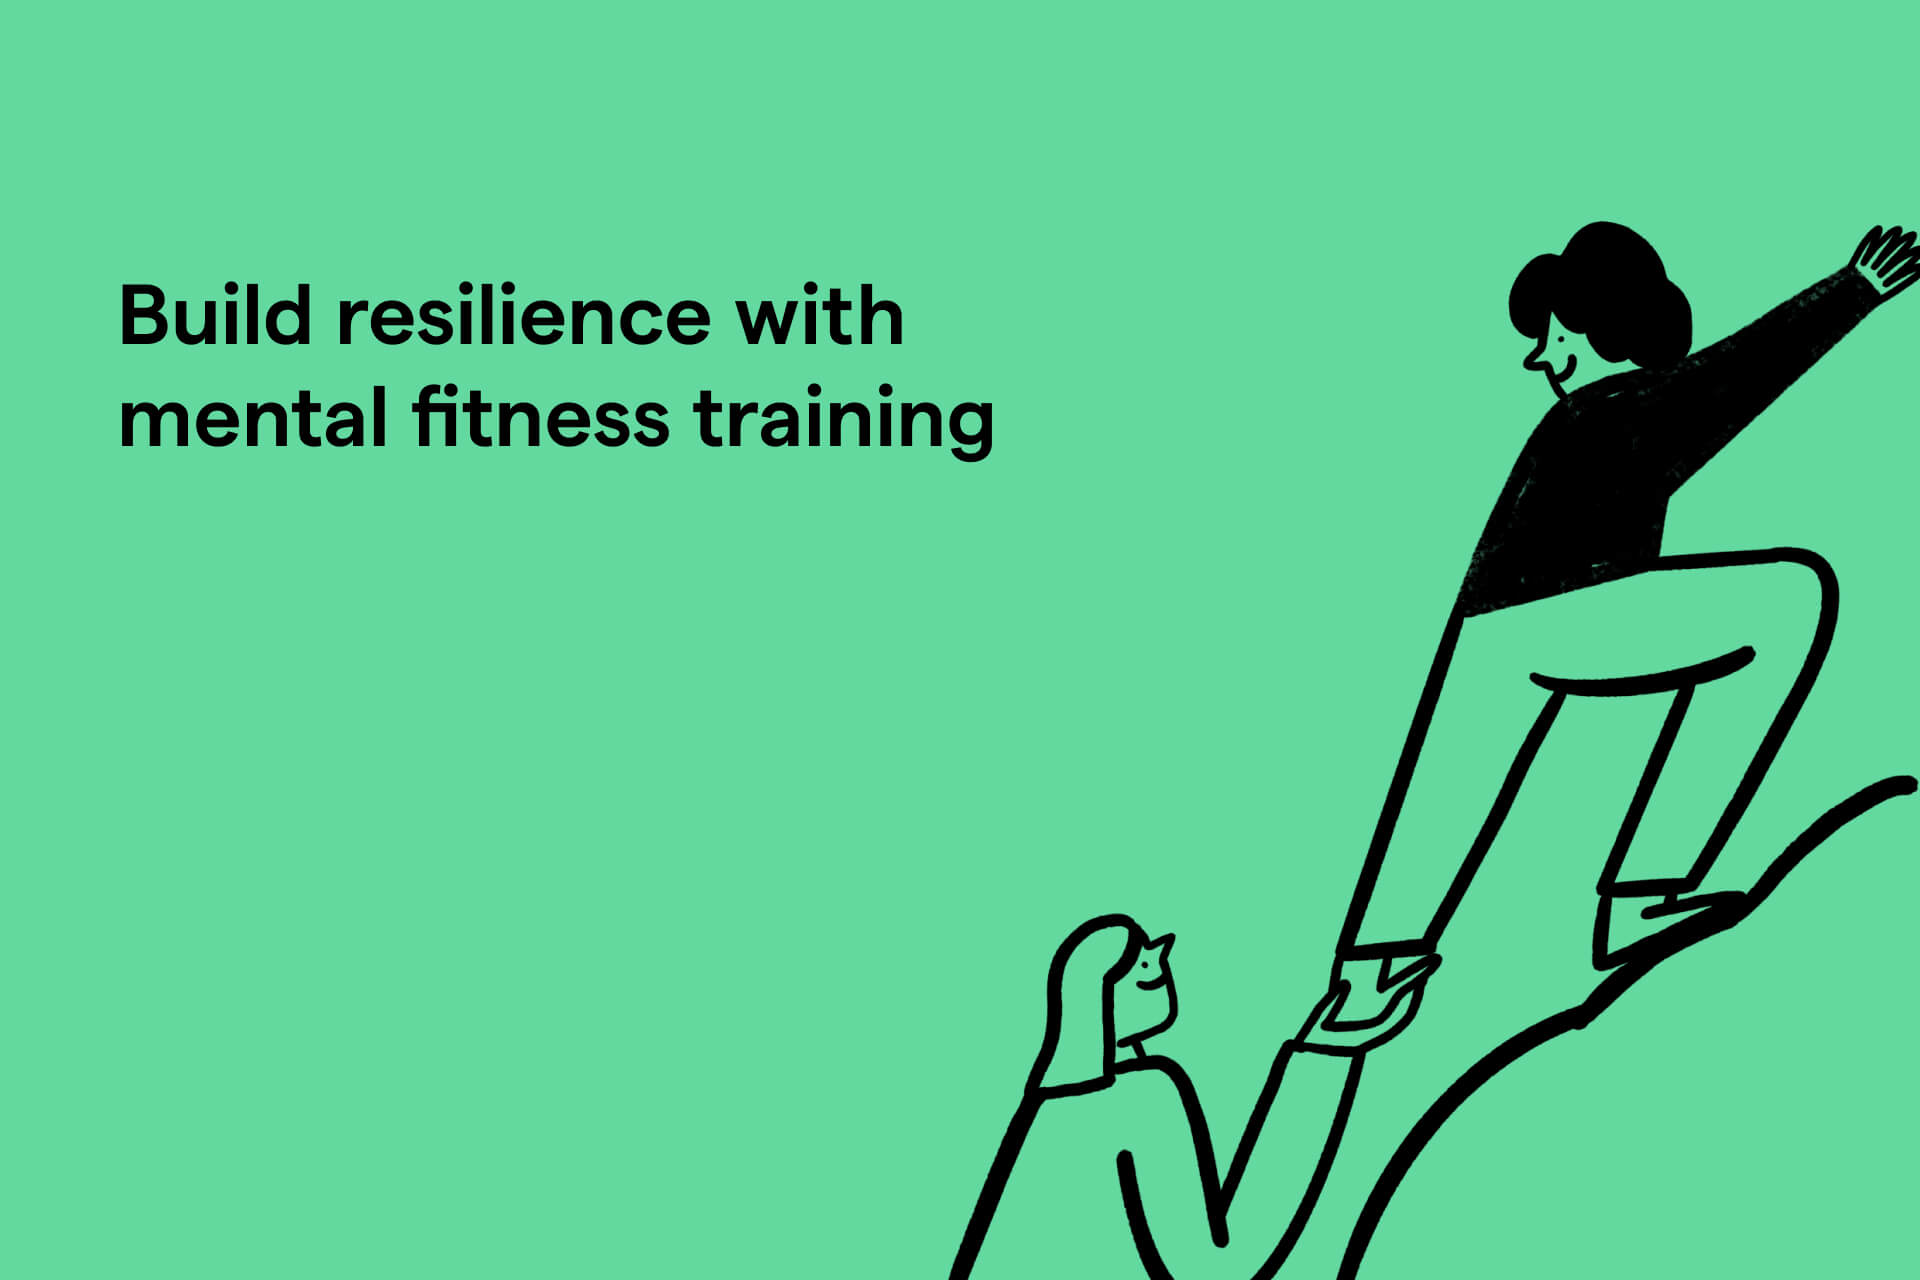 Build resilience with mental fitness training